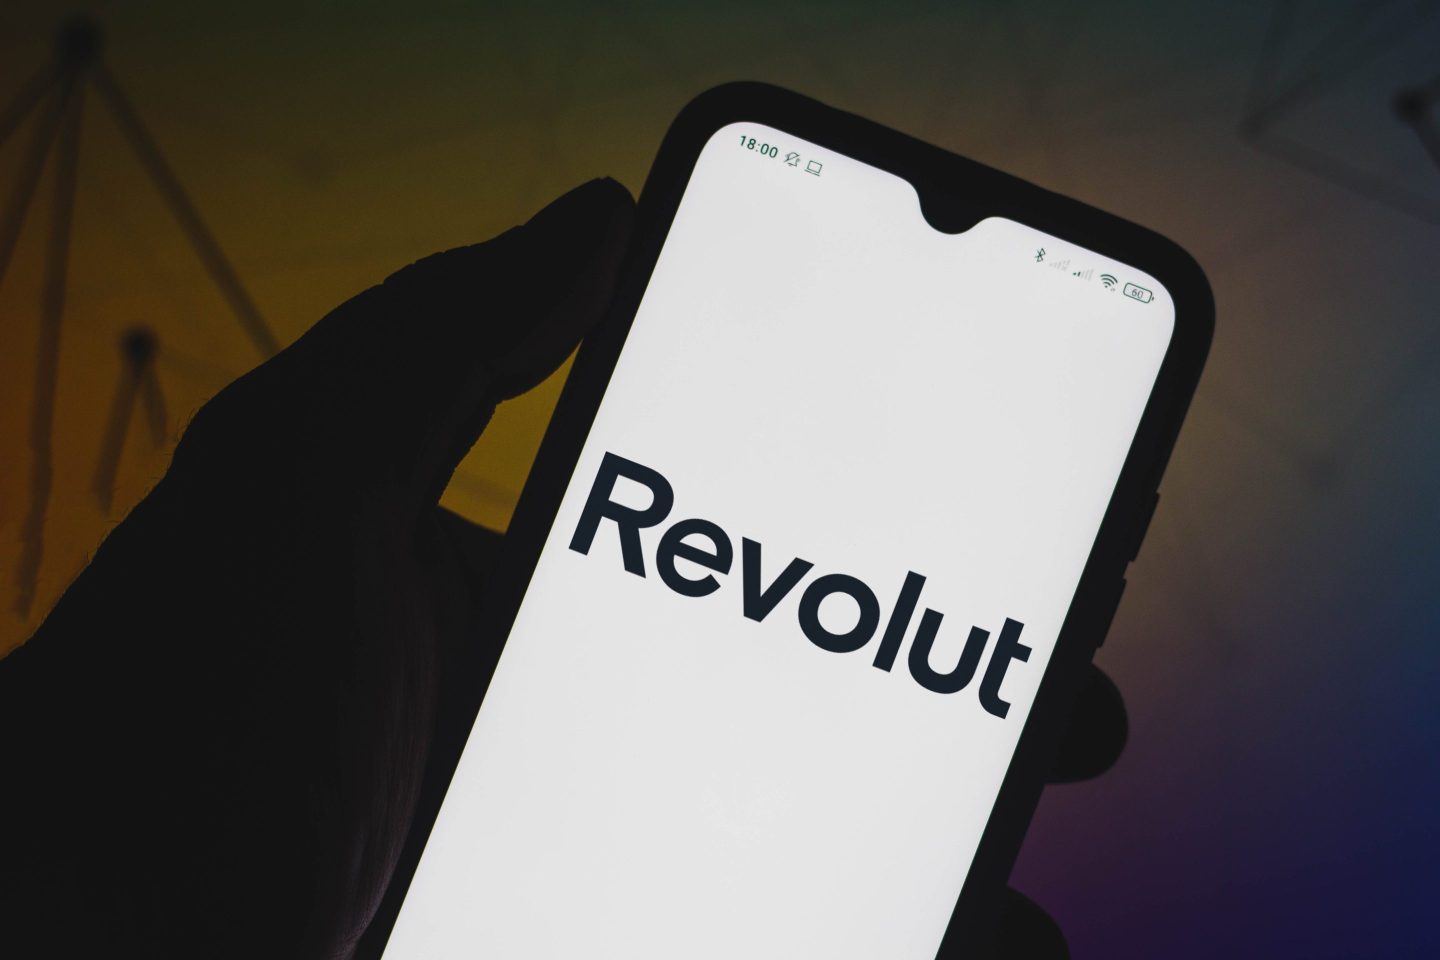 Revolut is a British fintech company with over 40 million global users.